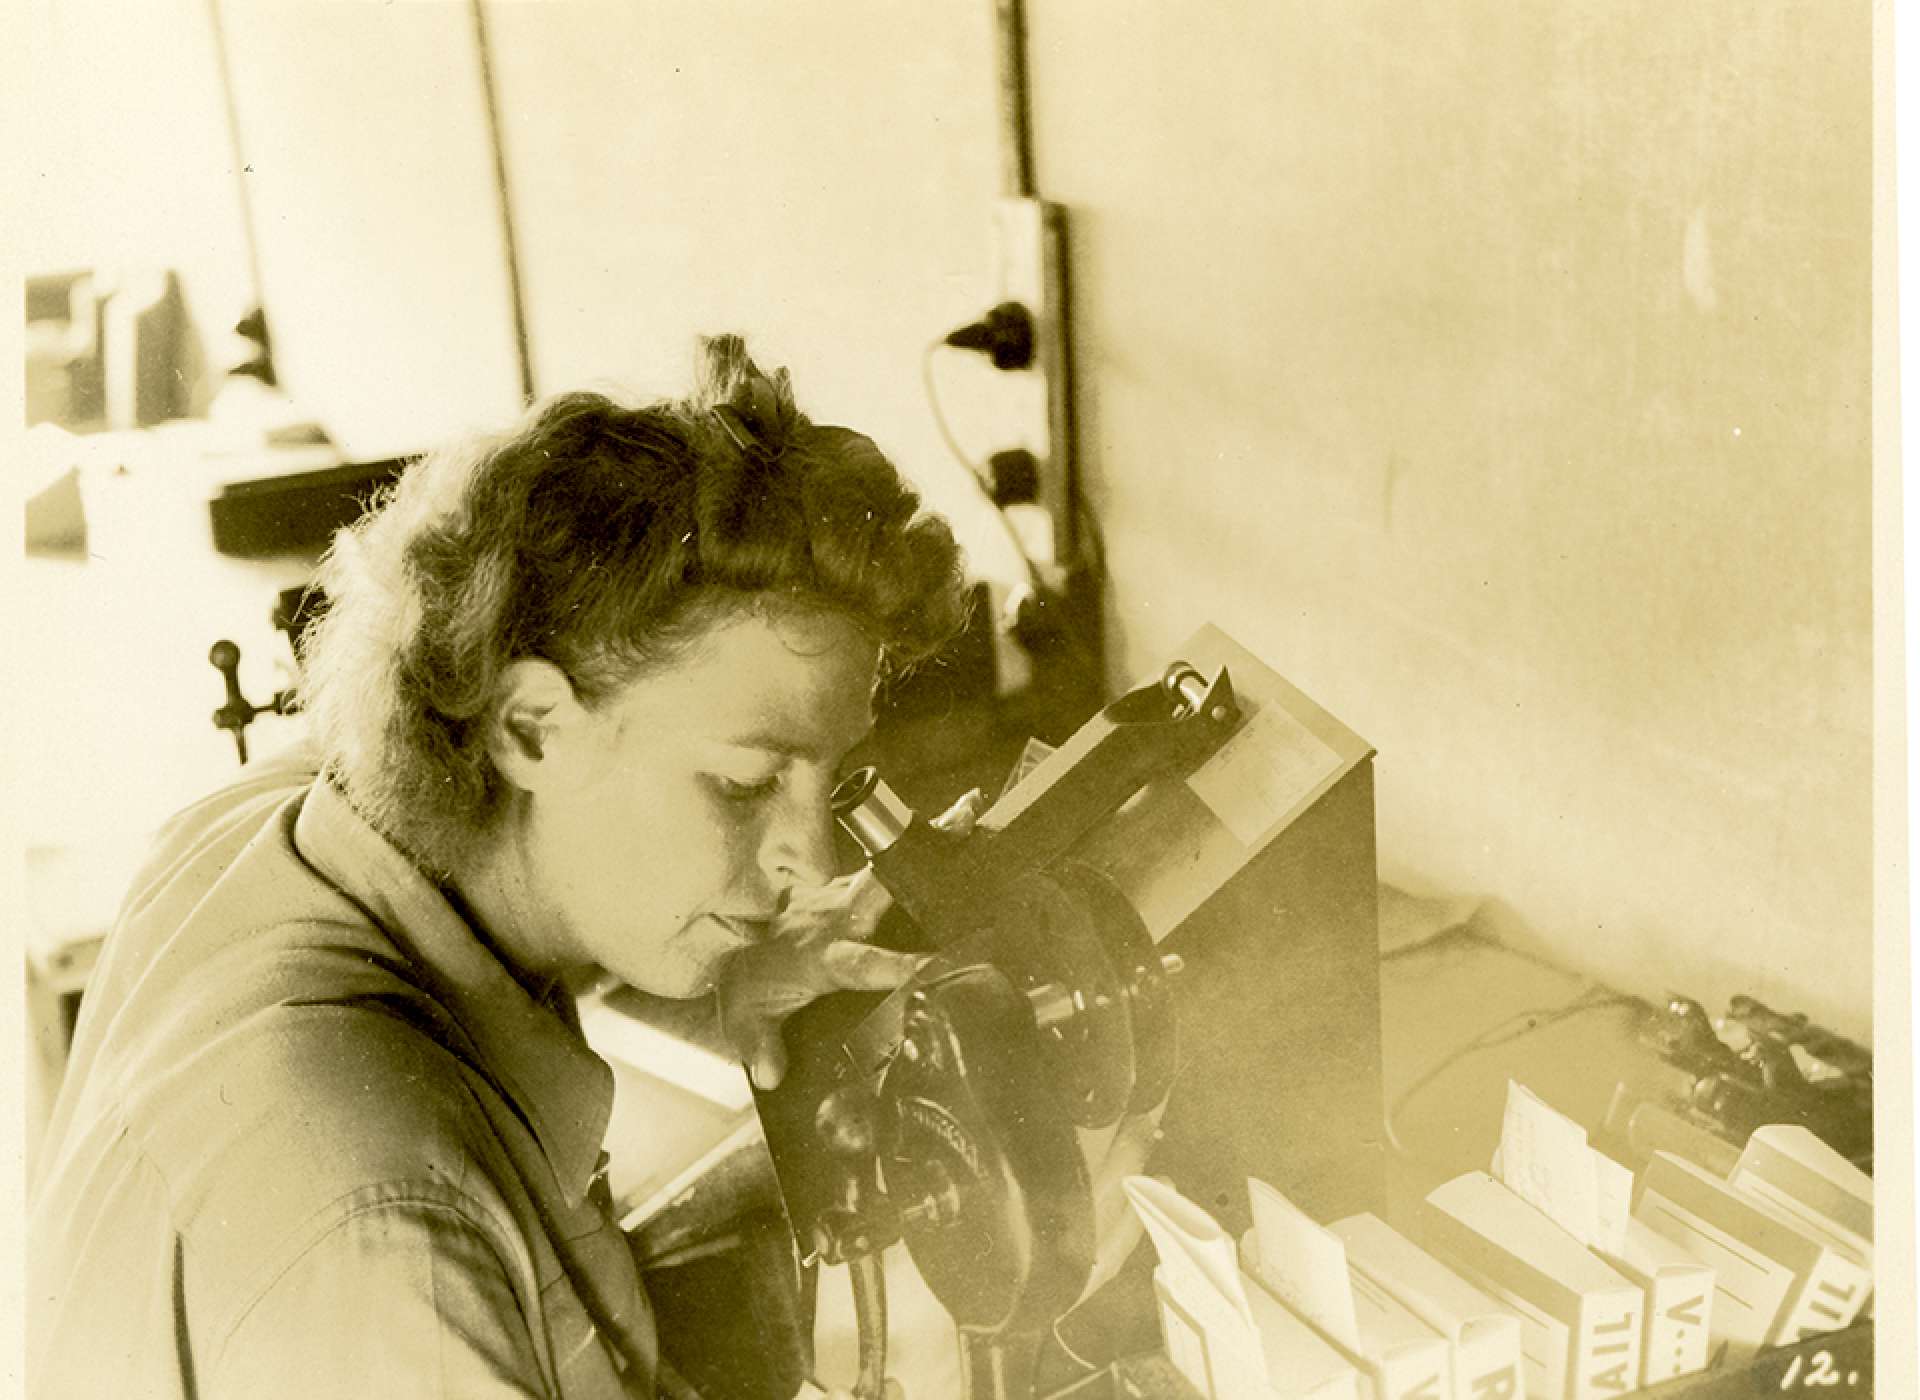 V-mail operation in the field at APO 929.”Following this, the density of the film is measured on a densitometer and the density noted on its carton, just prior to dispatch.”